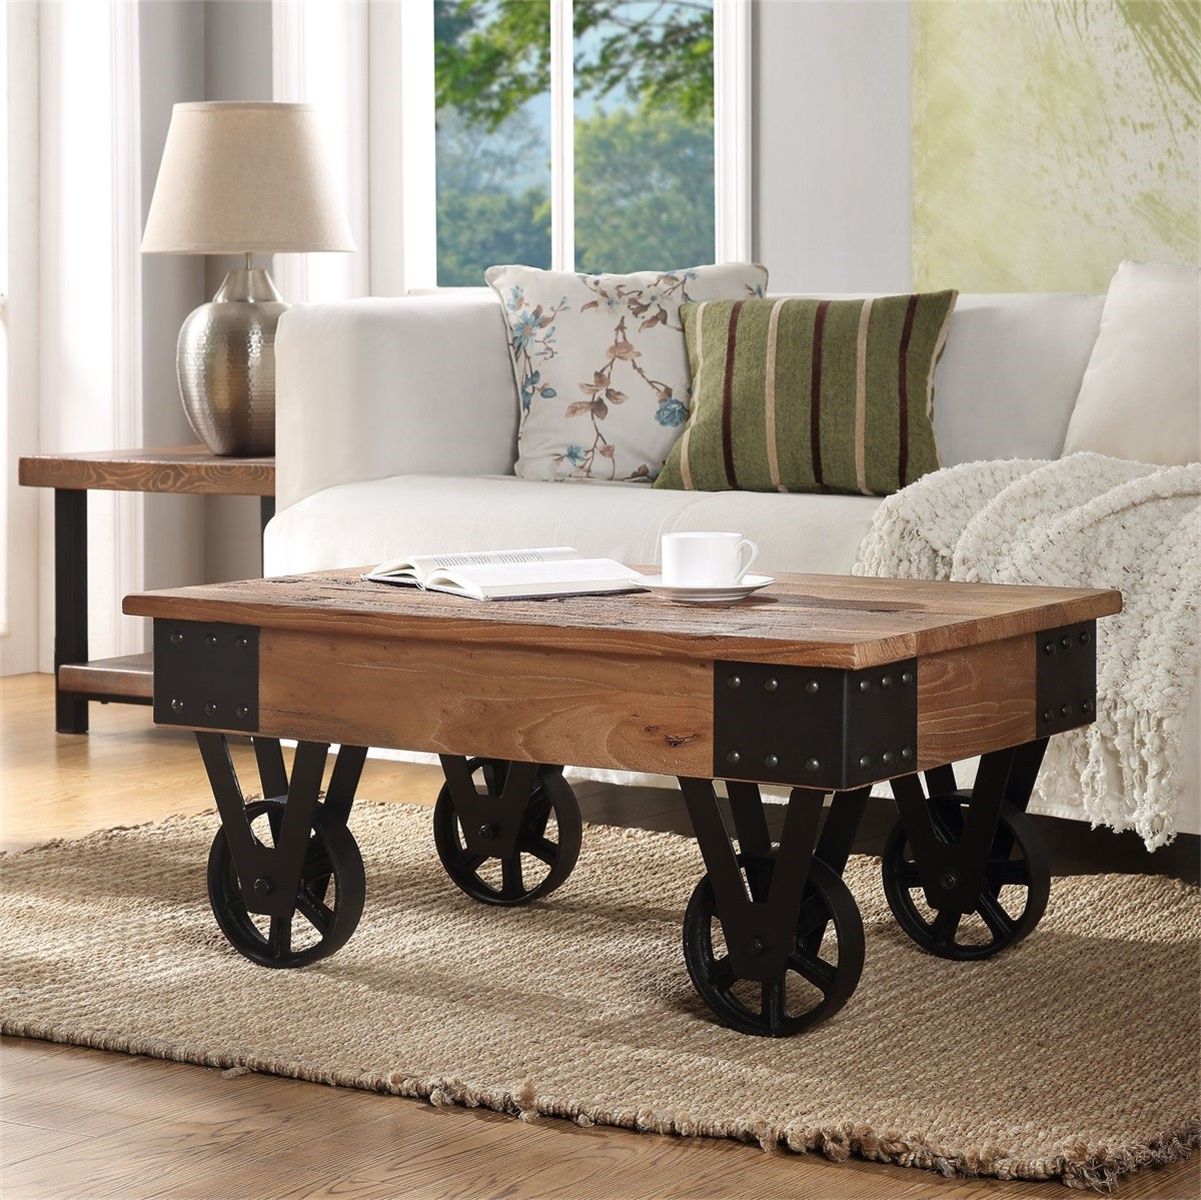 Modernluxe Farmhouse Vintage Mobile Coffee Table – Walmart Throughout Most Recently Released Antique White Black Coffee Tables (View 13 of 20)